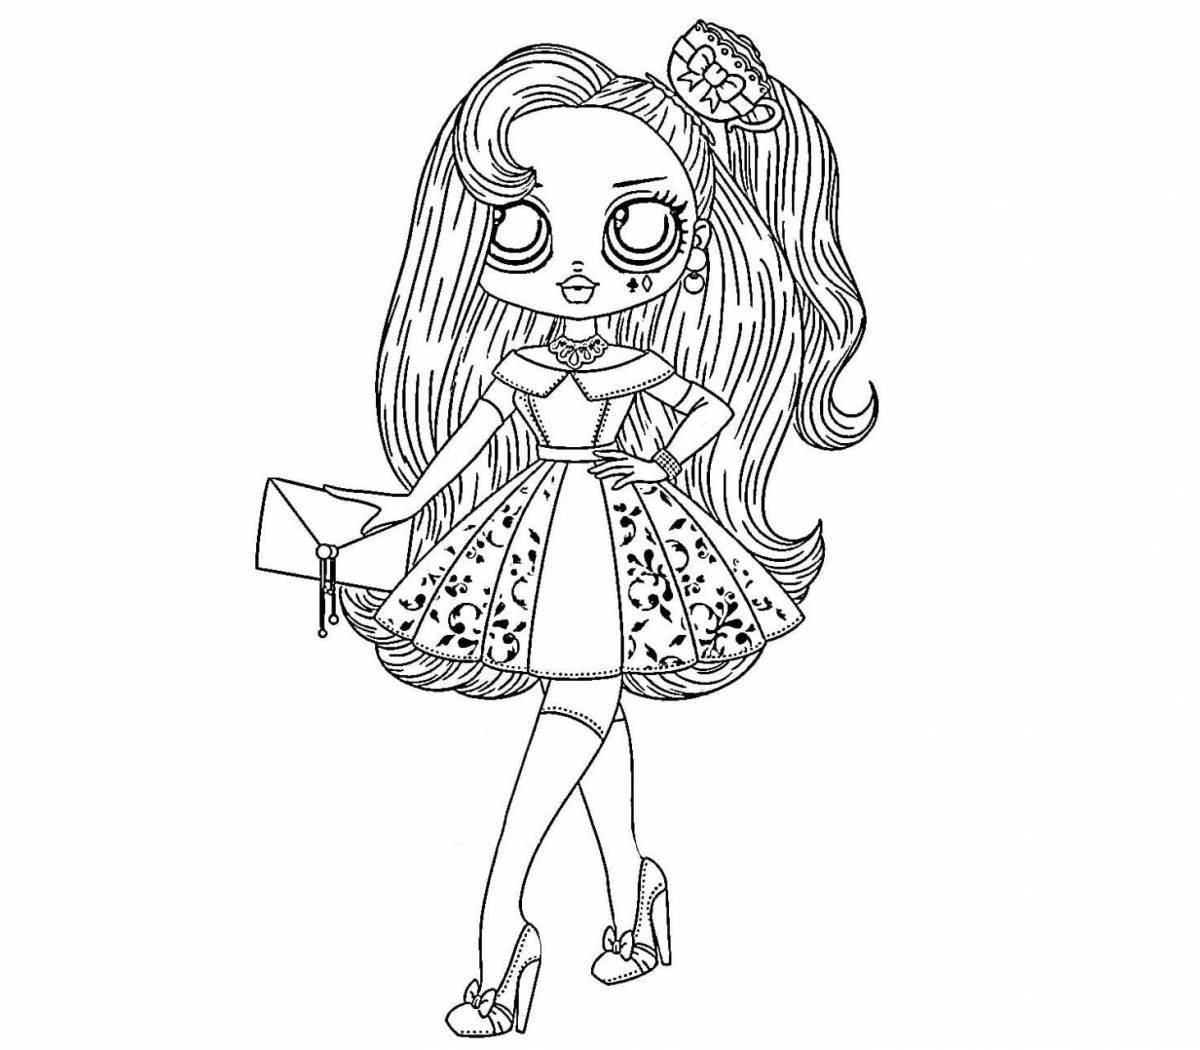 Color-frenzy coloring page lol teens